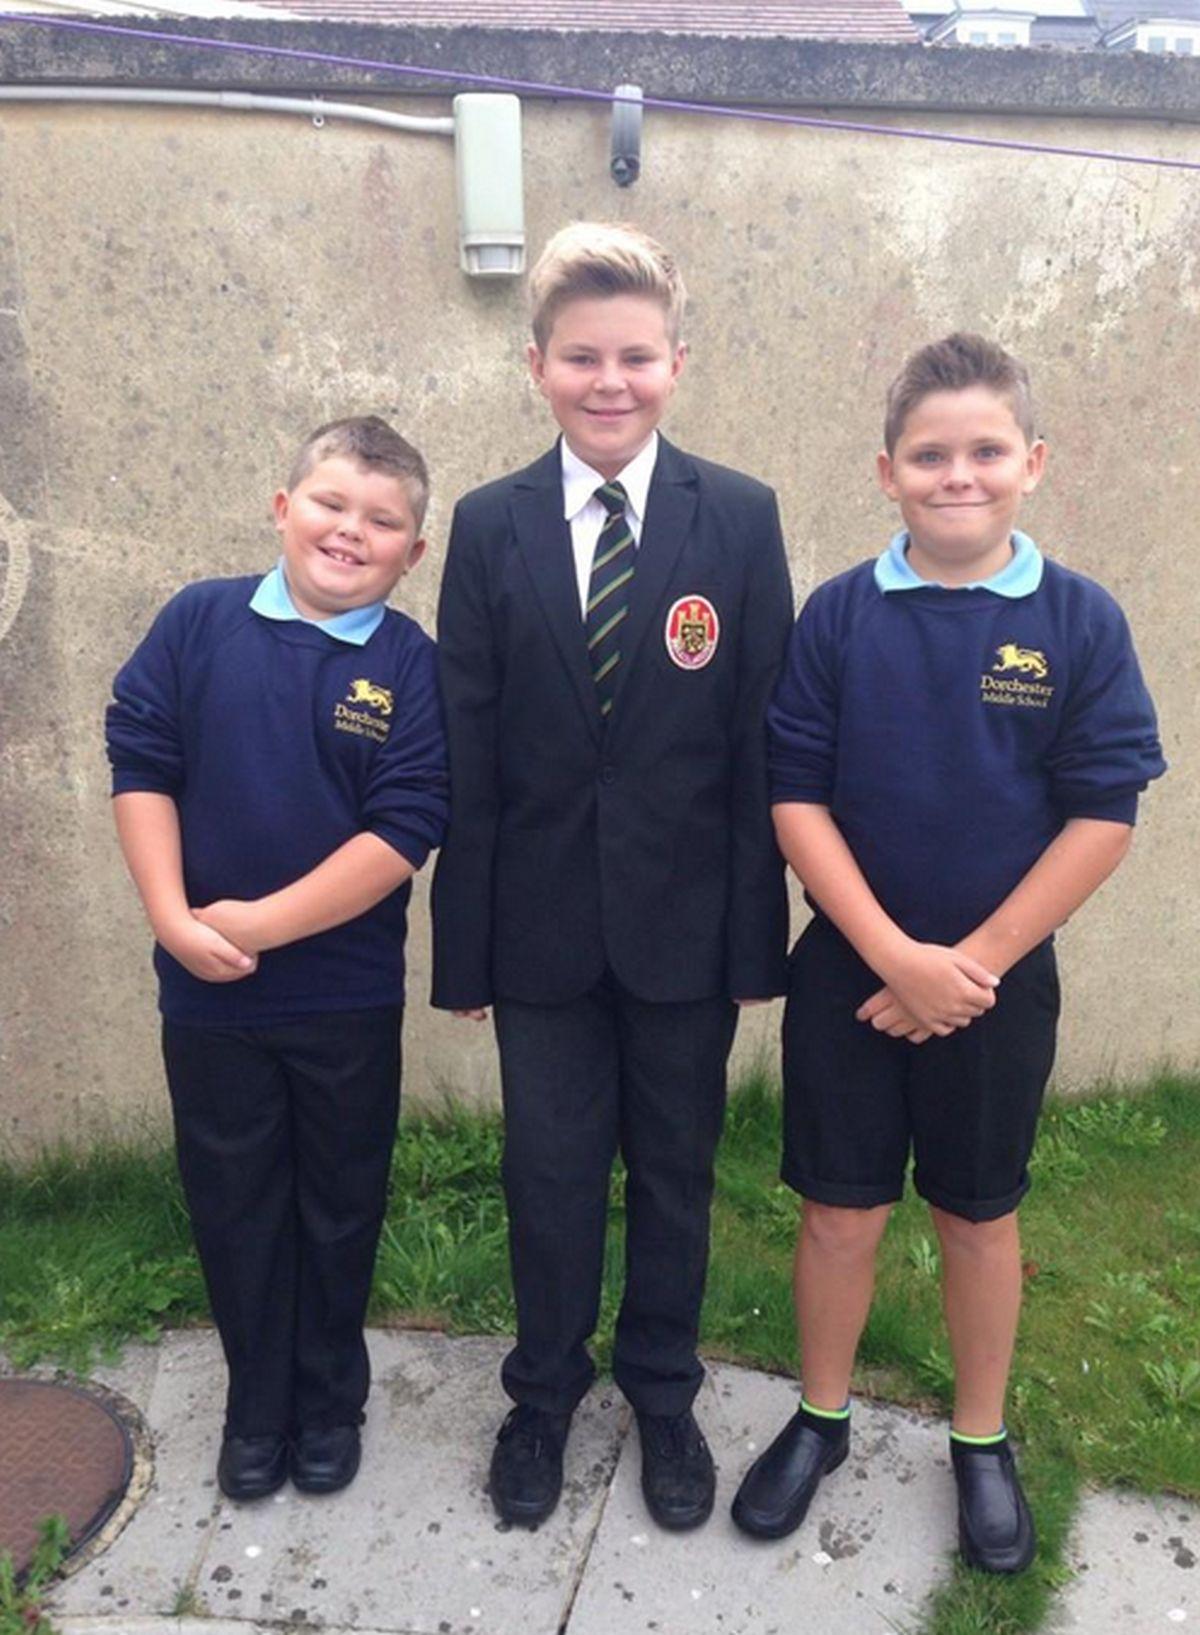 Back to School - Alfie who is new to Dorchester Middle School, Charlie who into Year 7 and Harry, who is new to Thomas Hardye School.